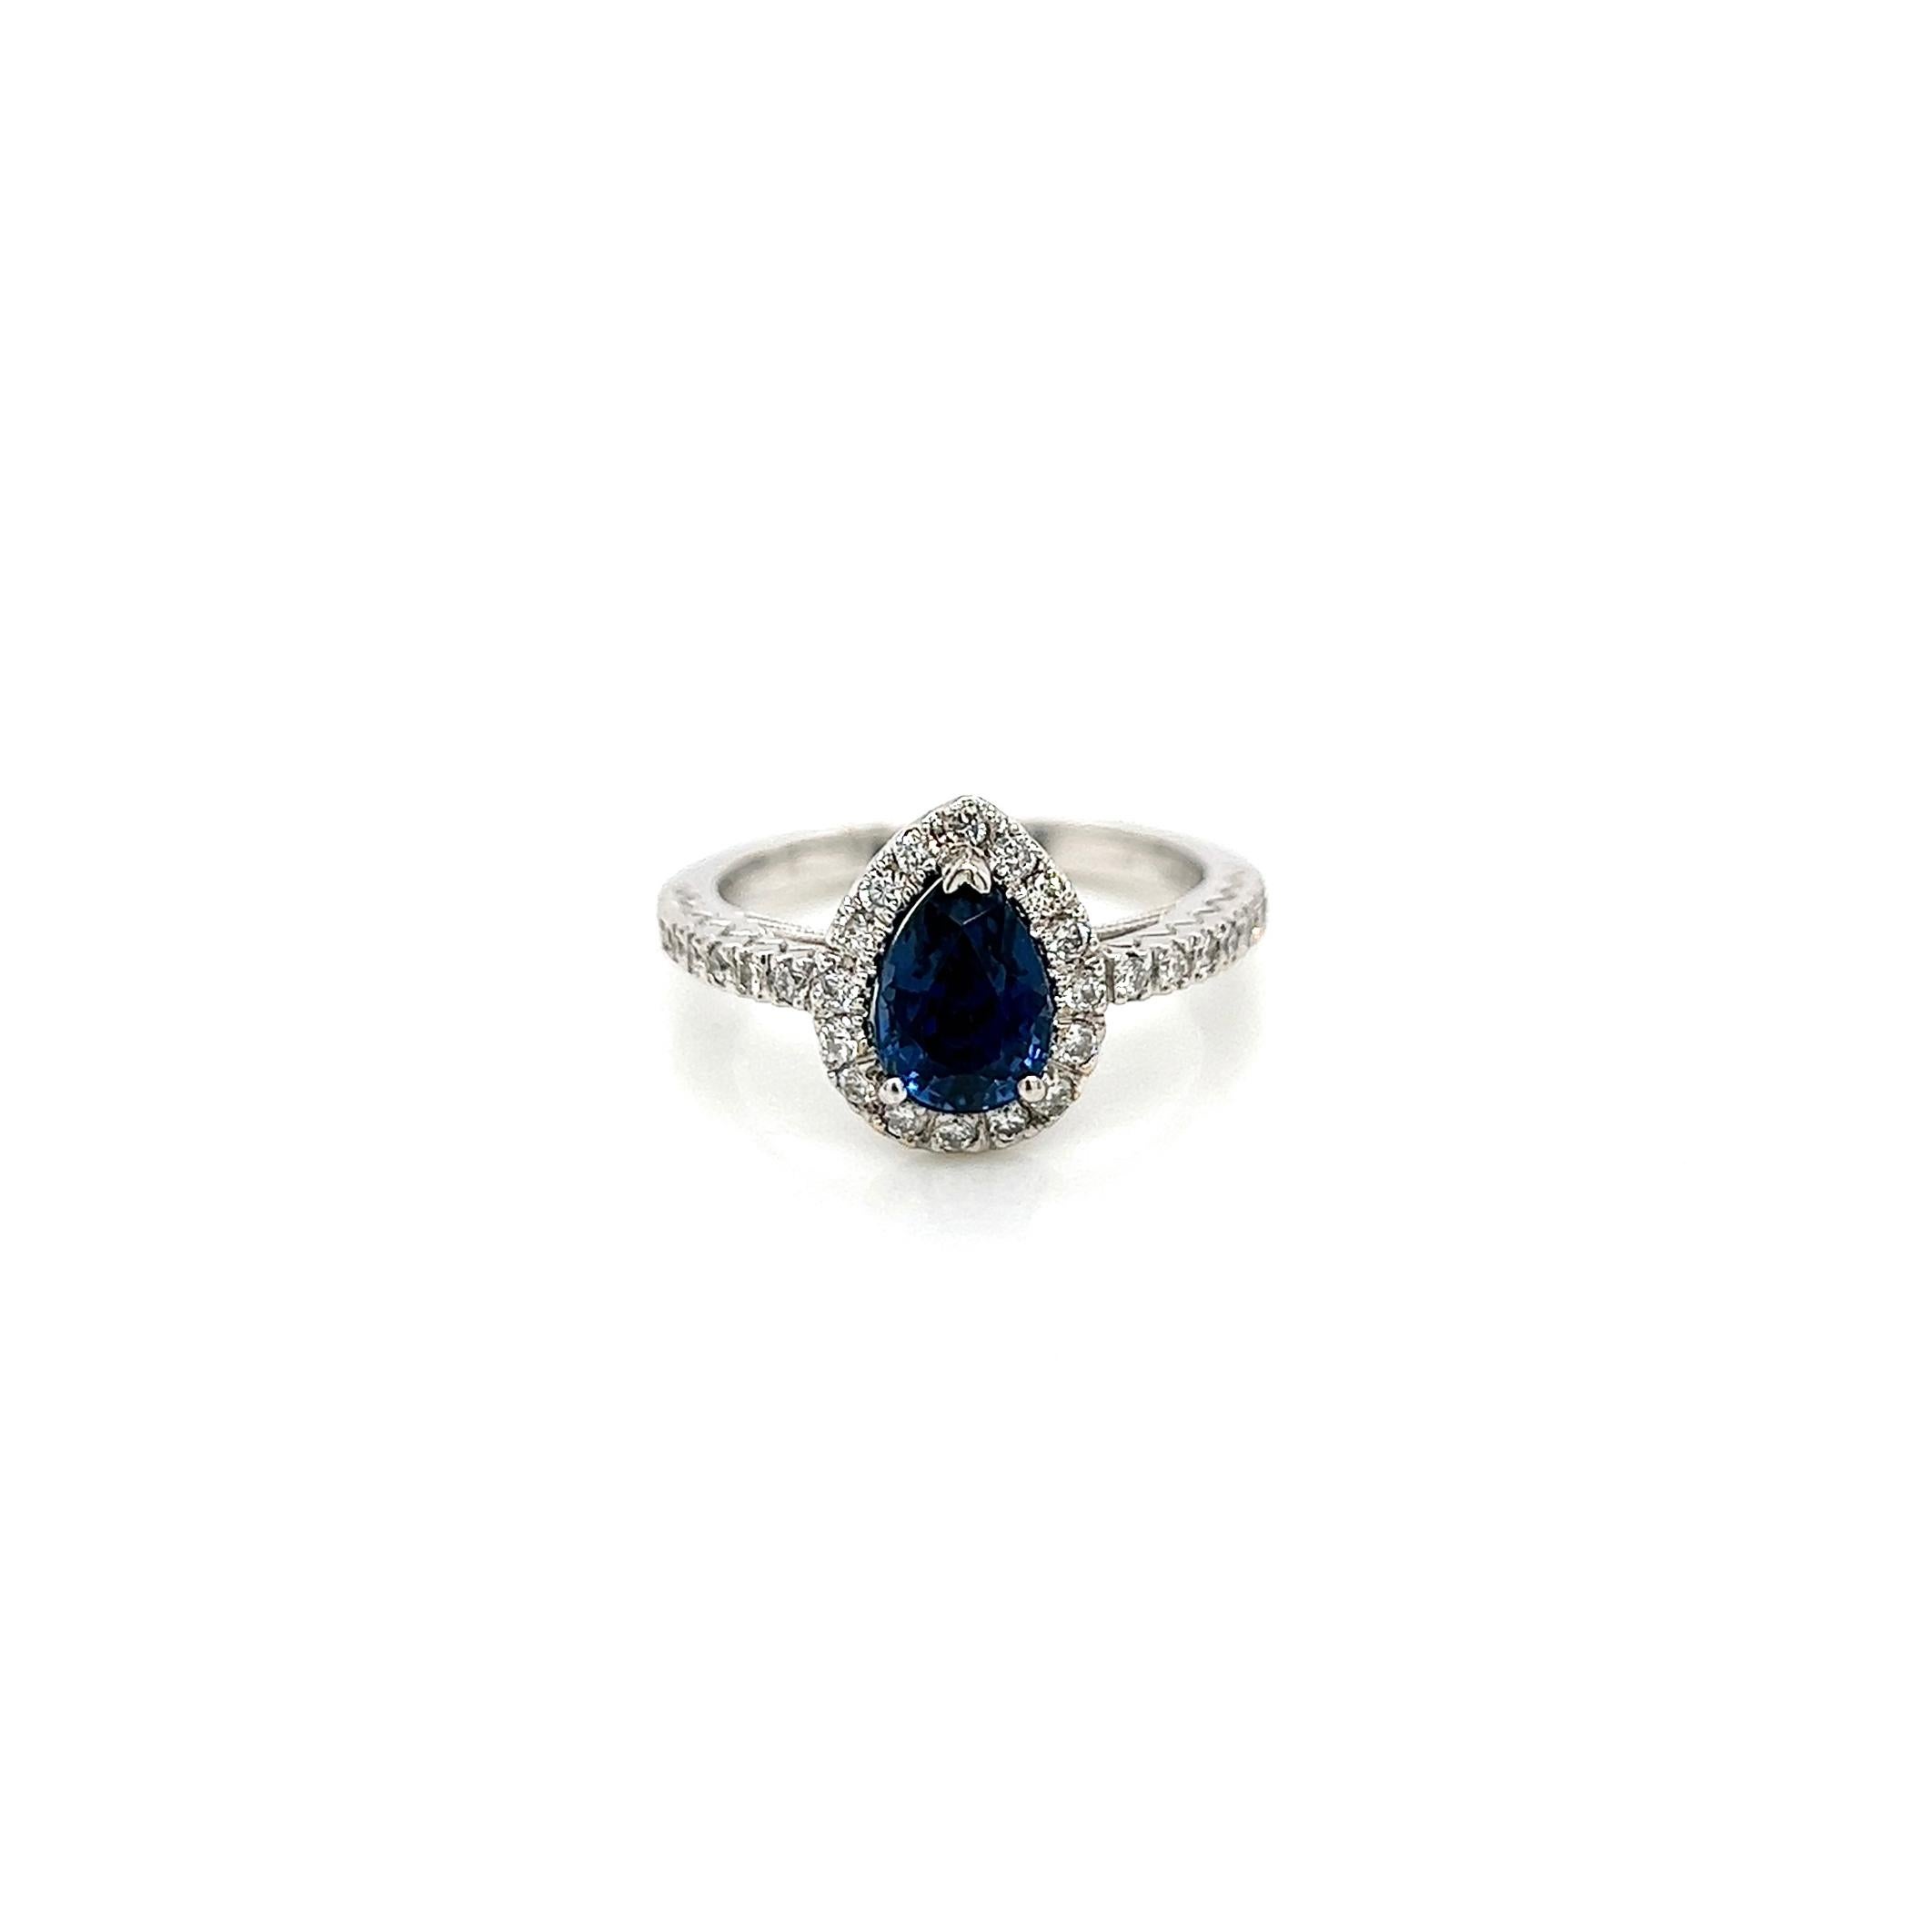 2.09 Total Carat Sapphire Diamond Engagement Ring

Ever thought about having a sapphire diamond engagement ring? Then you came to the right place! With our favorite color: color of the sea we boast a wide selection of sapphire diamond rings that